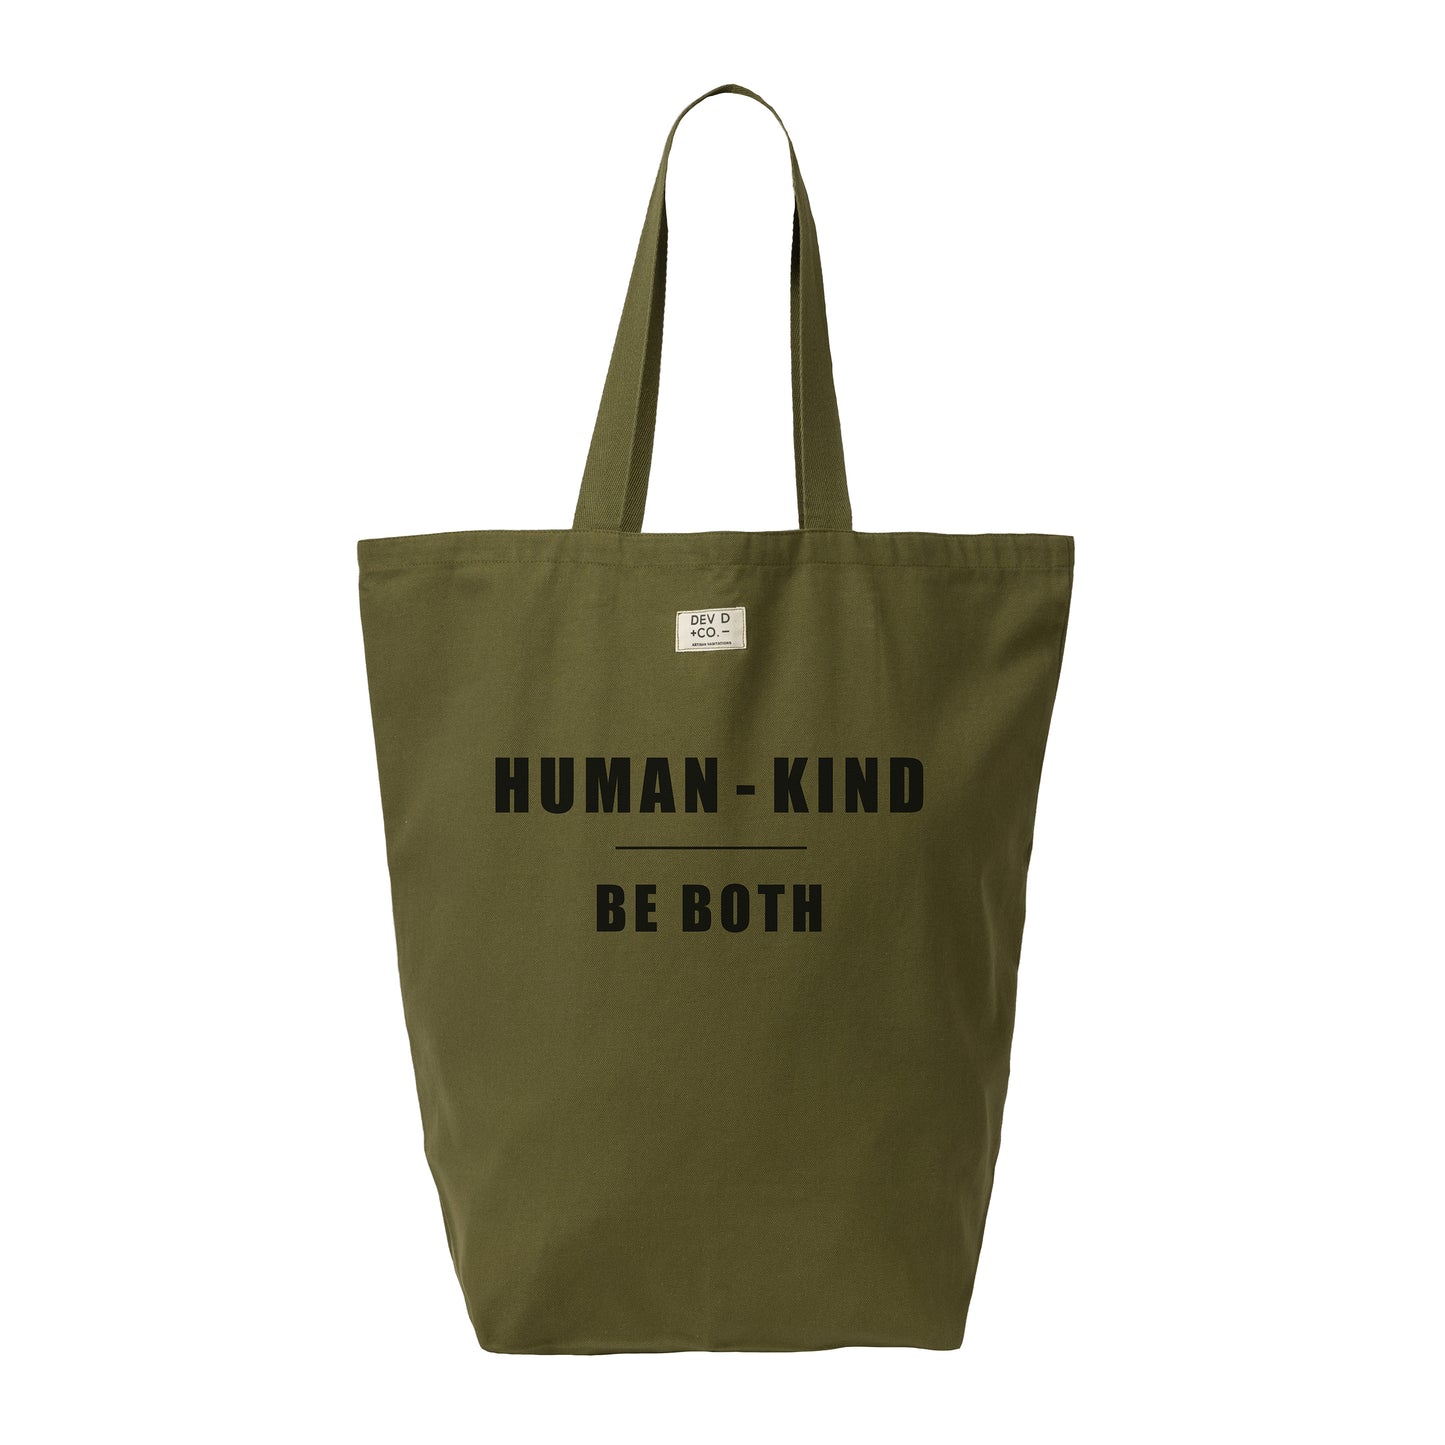 Human Kind - Canvas Tote Bag with Pocket - Large Tote